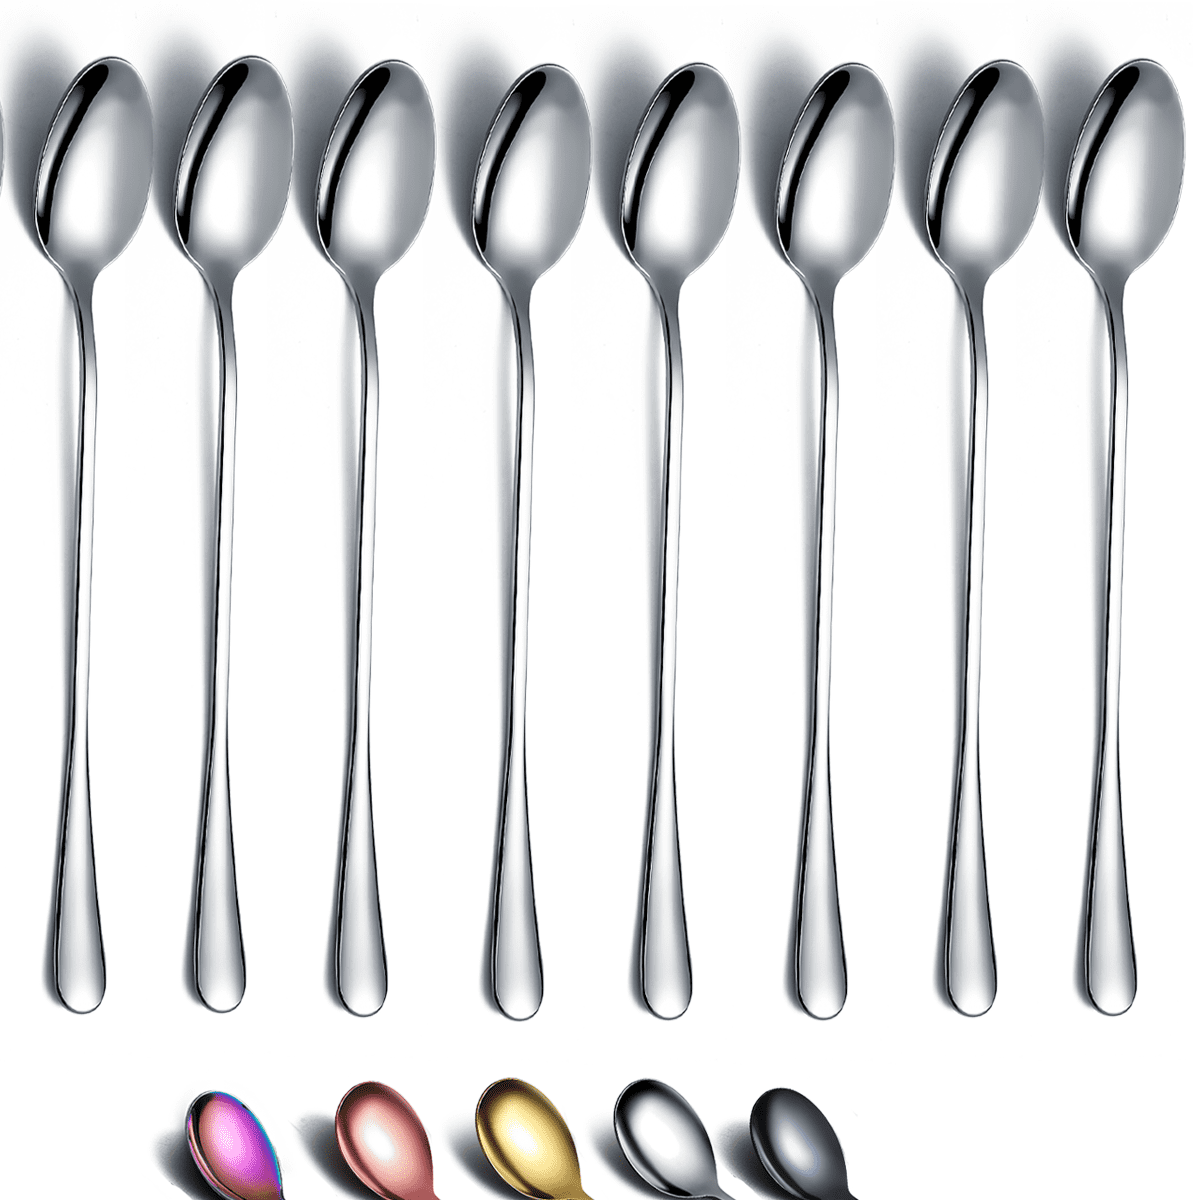 DGQ Cute Cat Stainless Steel Coffee Spoon Tea Spoon Set for Dessert and Coffee,Set of 4 